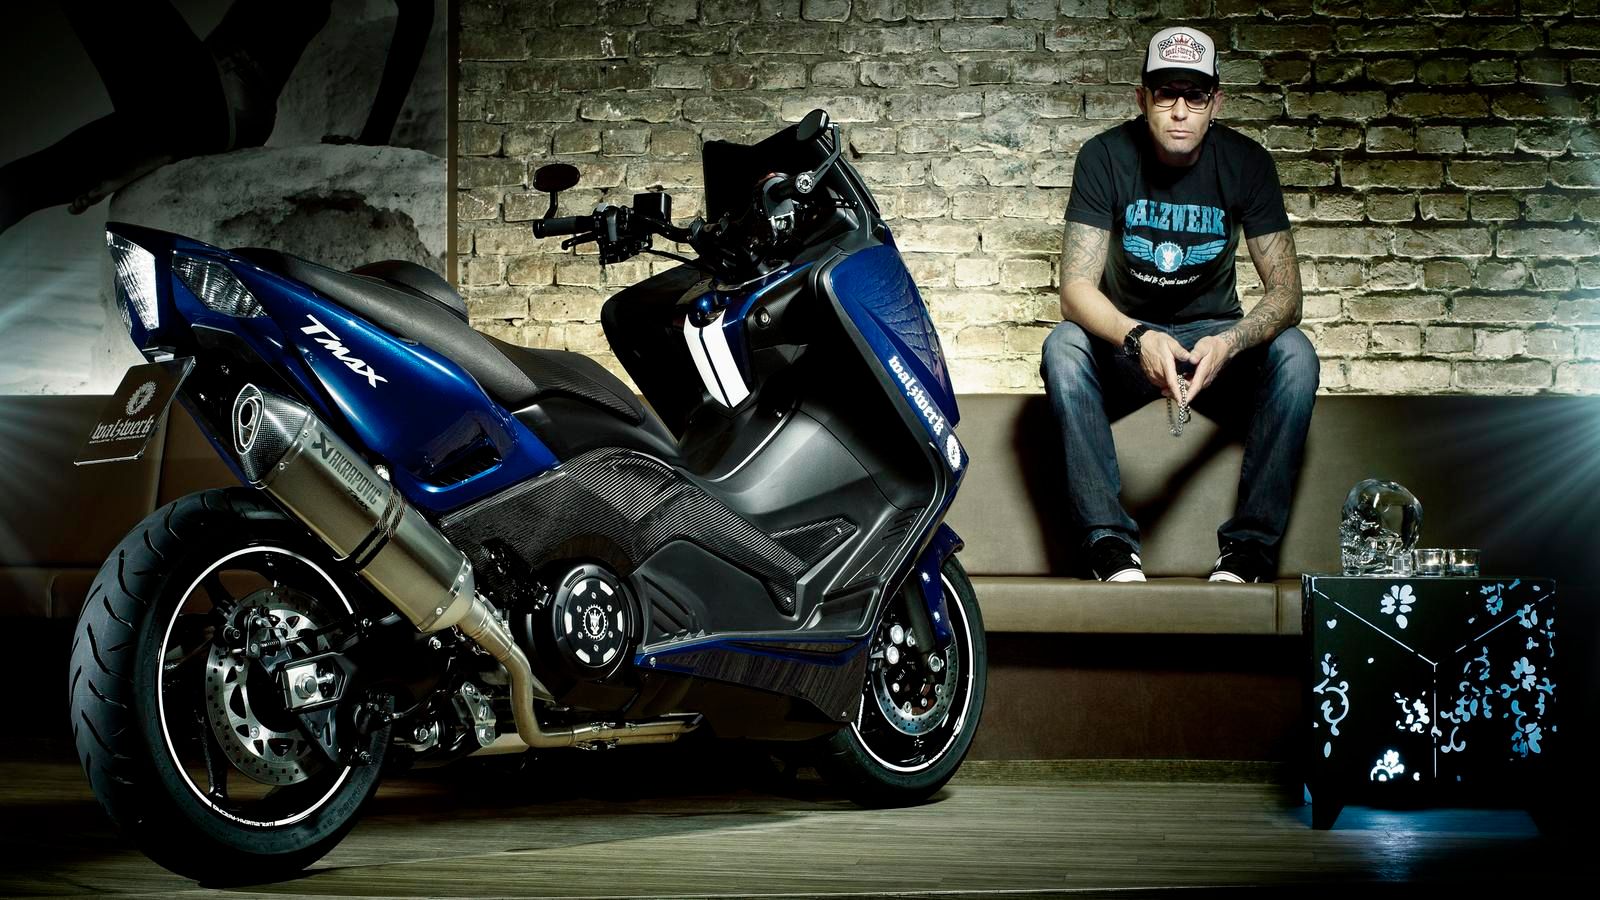 2012 Yamaha T-Max Hyper Modified by Marcus Walz